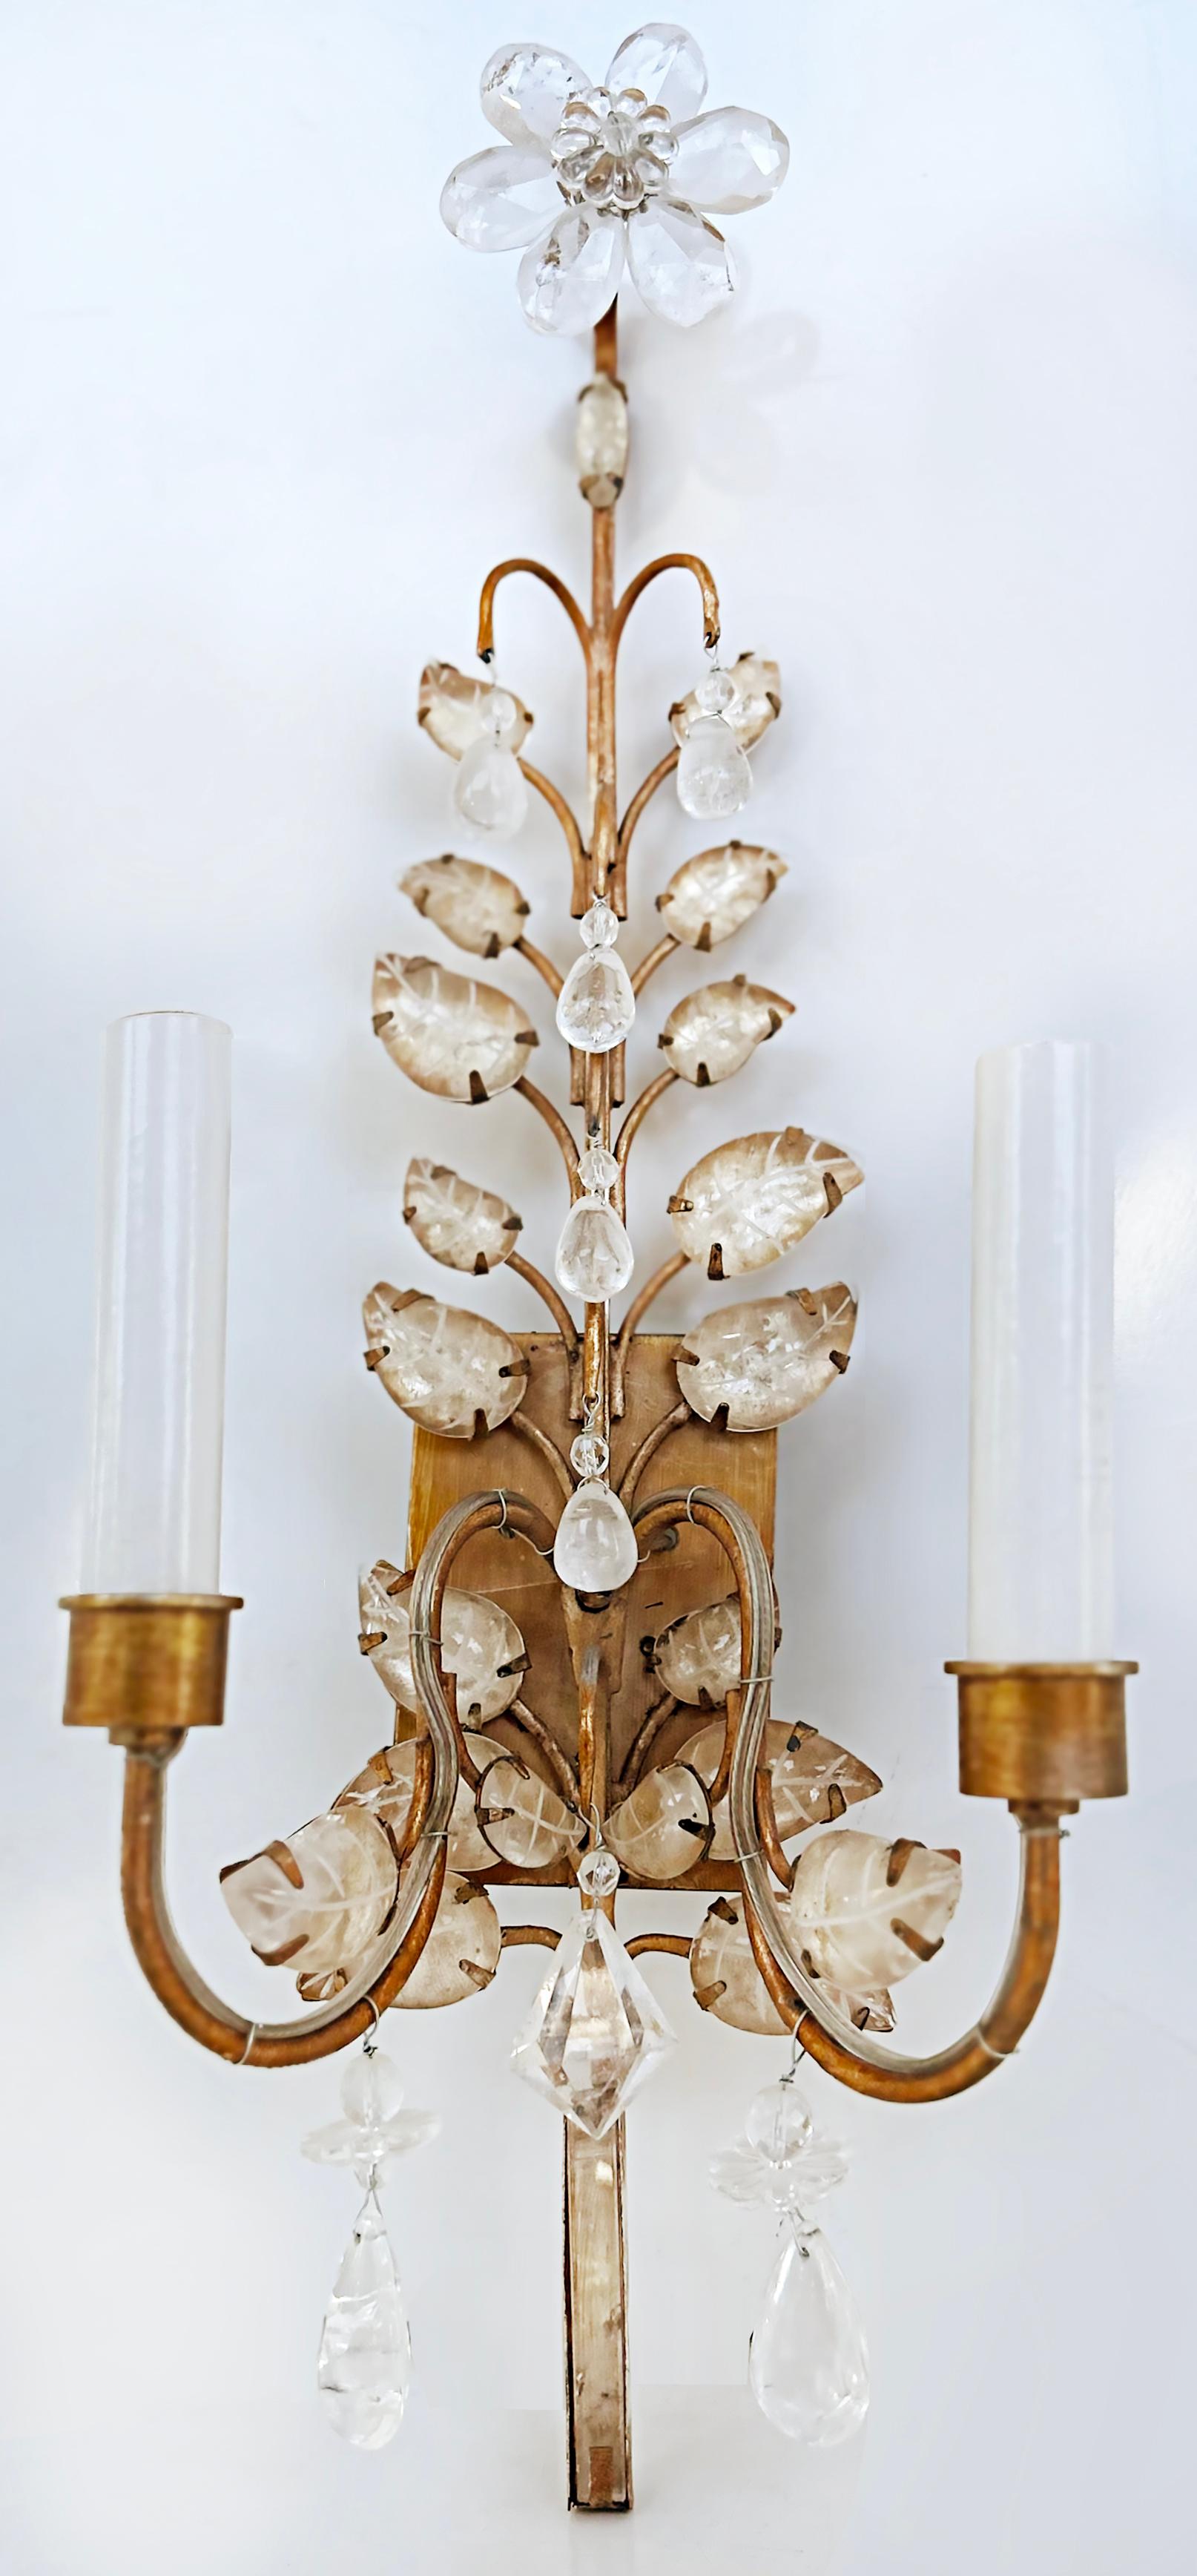 Niermann weeks rock crystal wall sconces, manner of bagues, pair.

Offered for sale is a pair of Niermann Weeks rock crystal wall sconces that were created in the manner of Mason Bagues. These traditionally styled sconces are French-wired to a